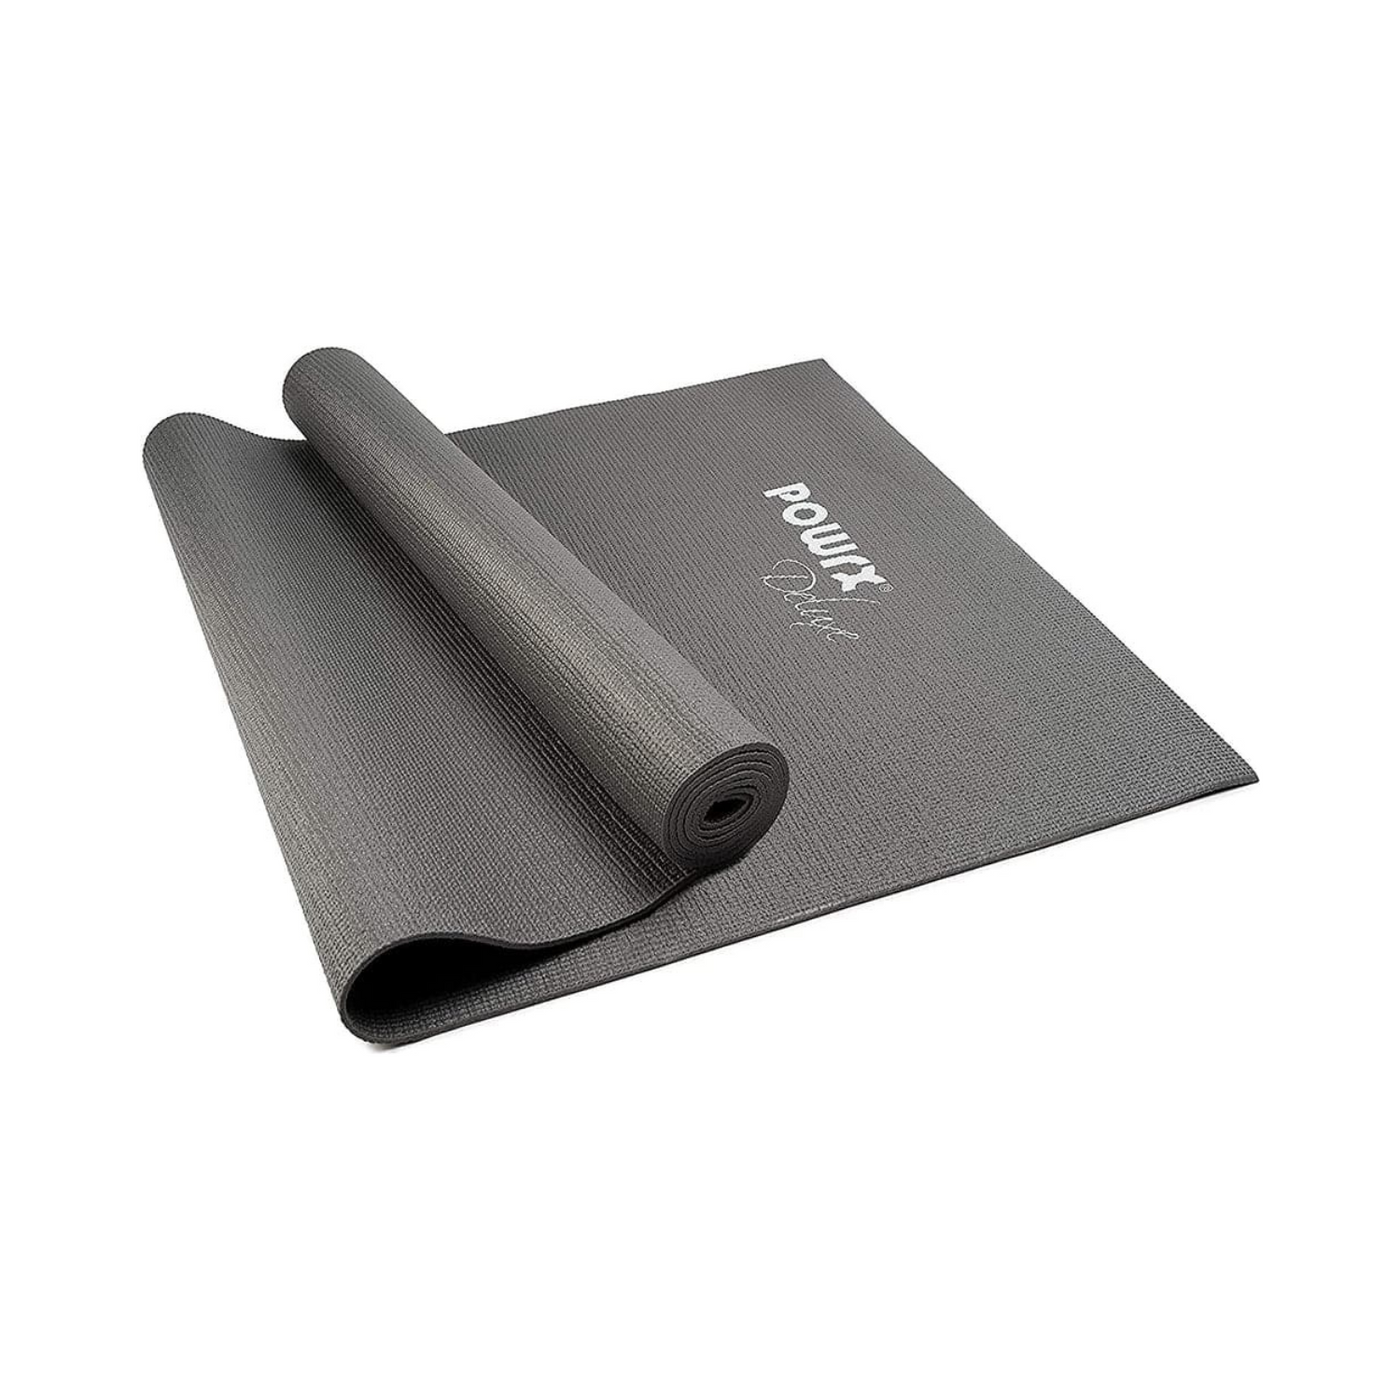 Super Thin Fitness Mat with Bag